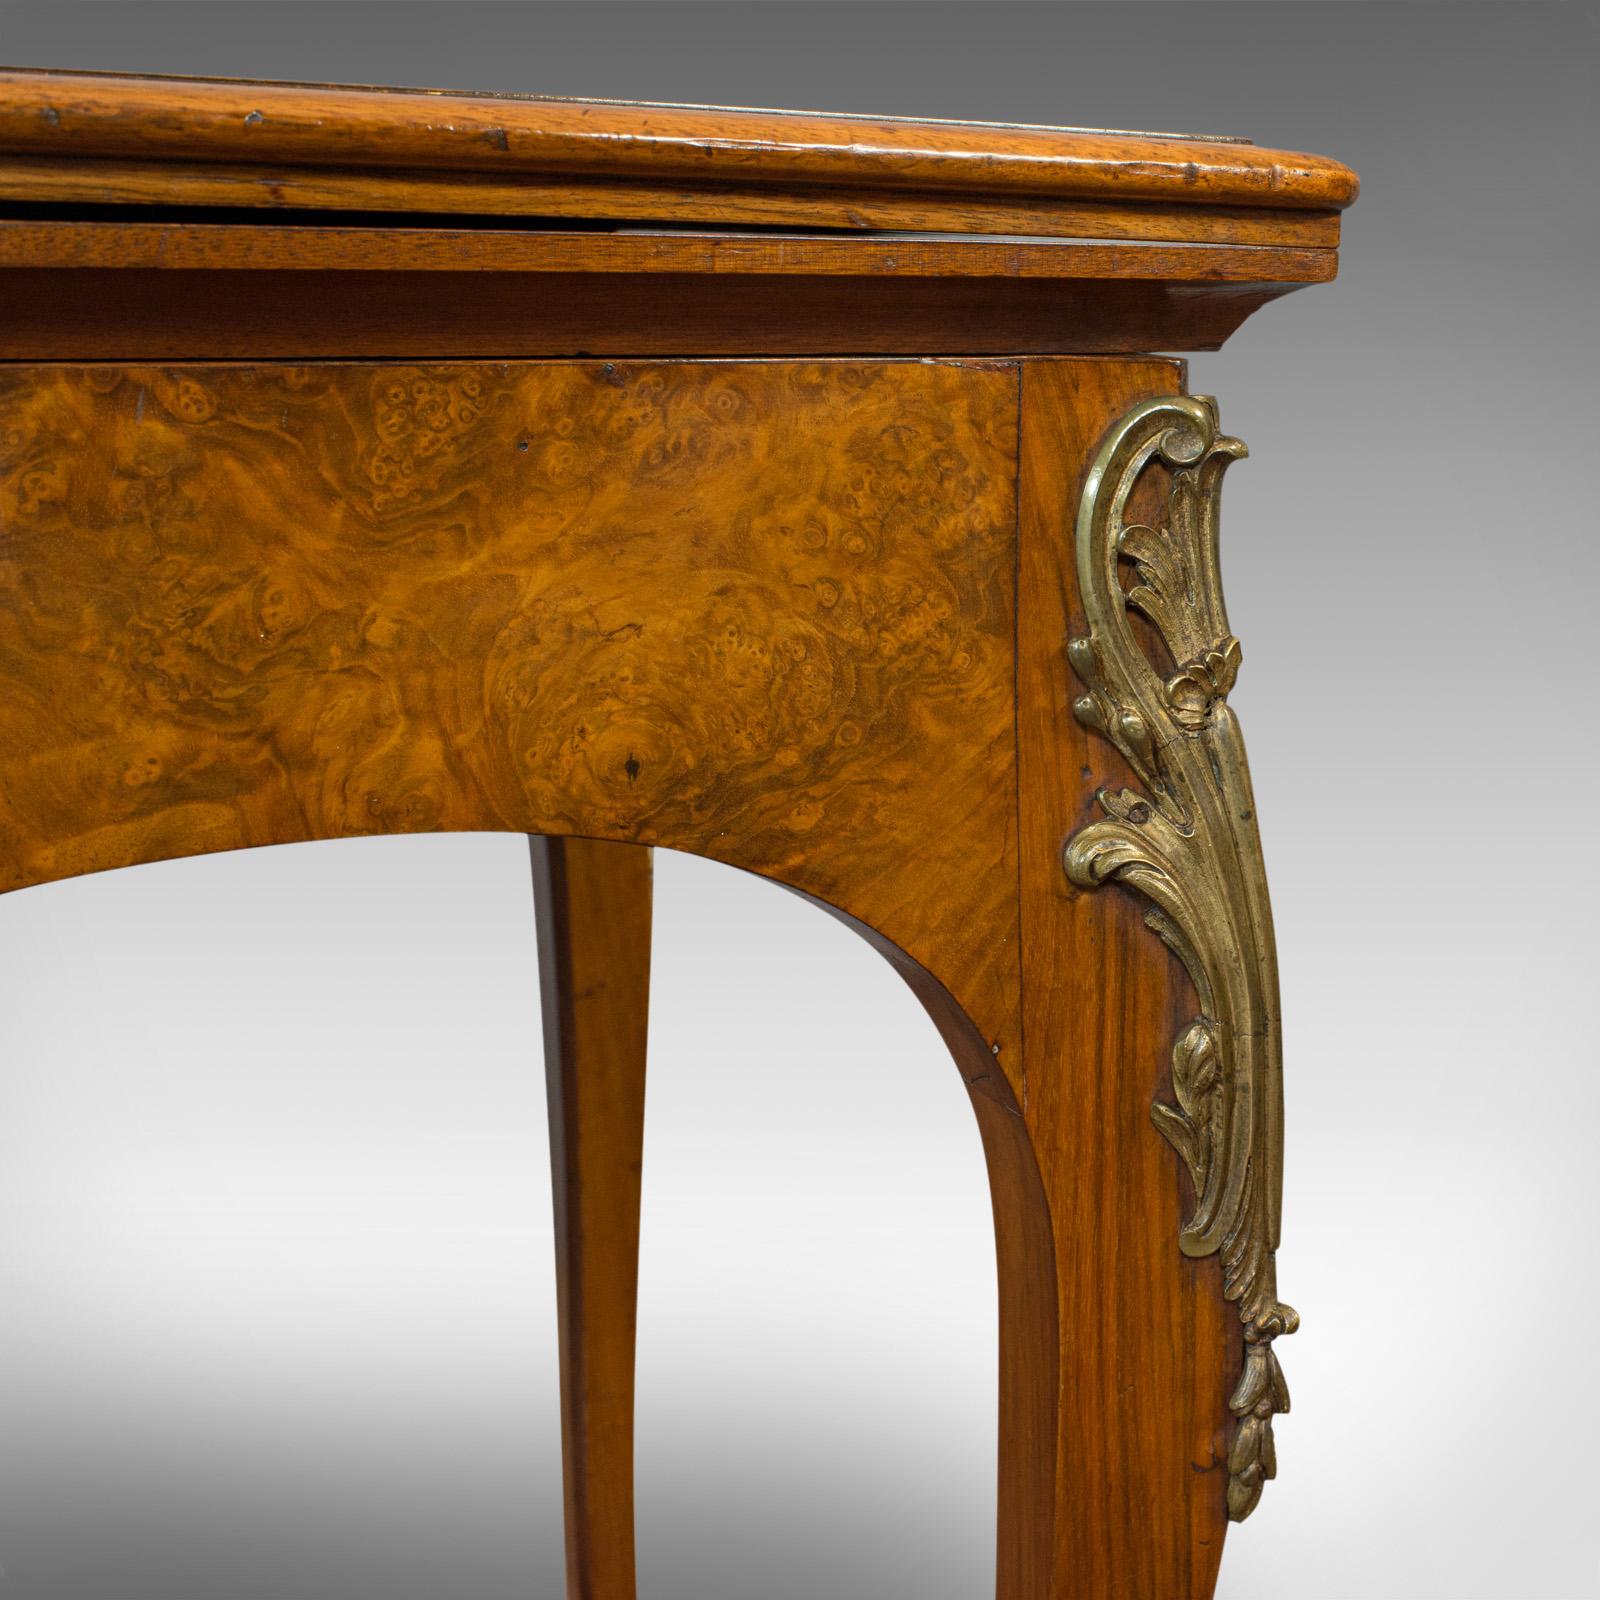 Antique Card Table, French, Burr Walnut, Fold over, Games, Victorian, circa 1870 For Sale 3